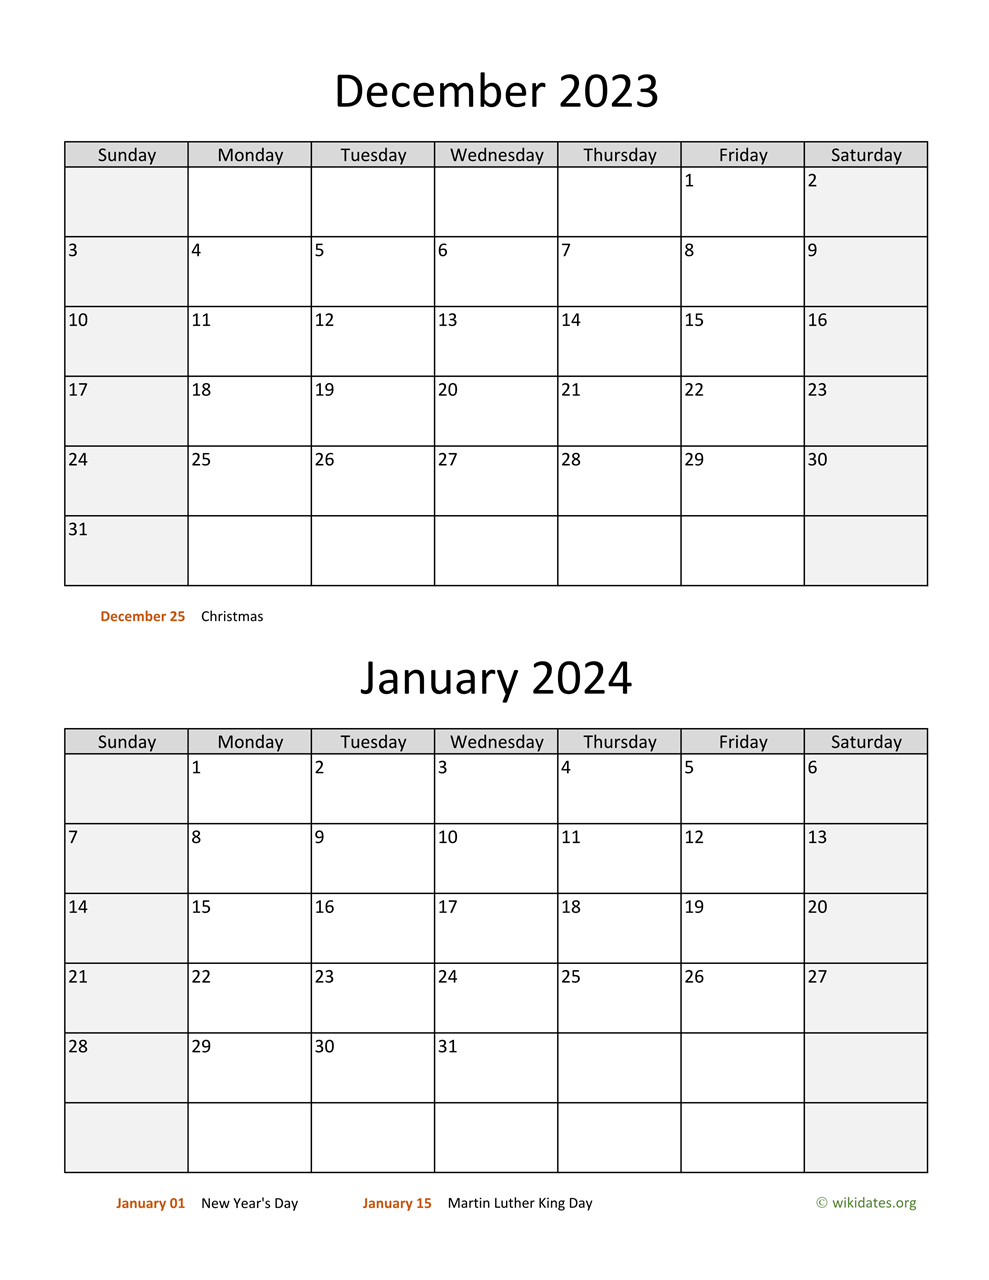 December 2023 And January 2024 Calendar | Wikidates for Printable Calendar December 2023 January 2024